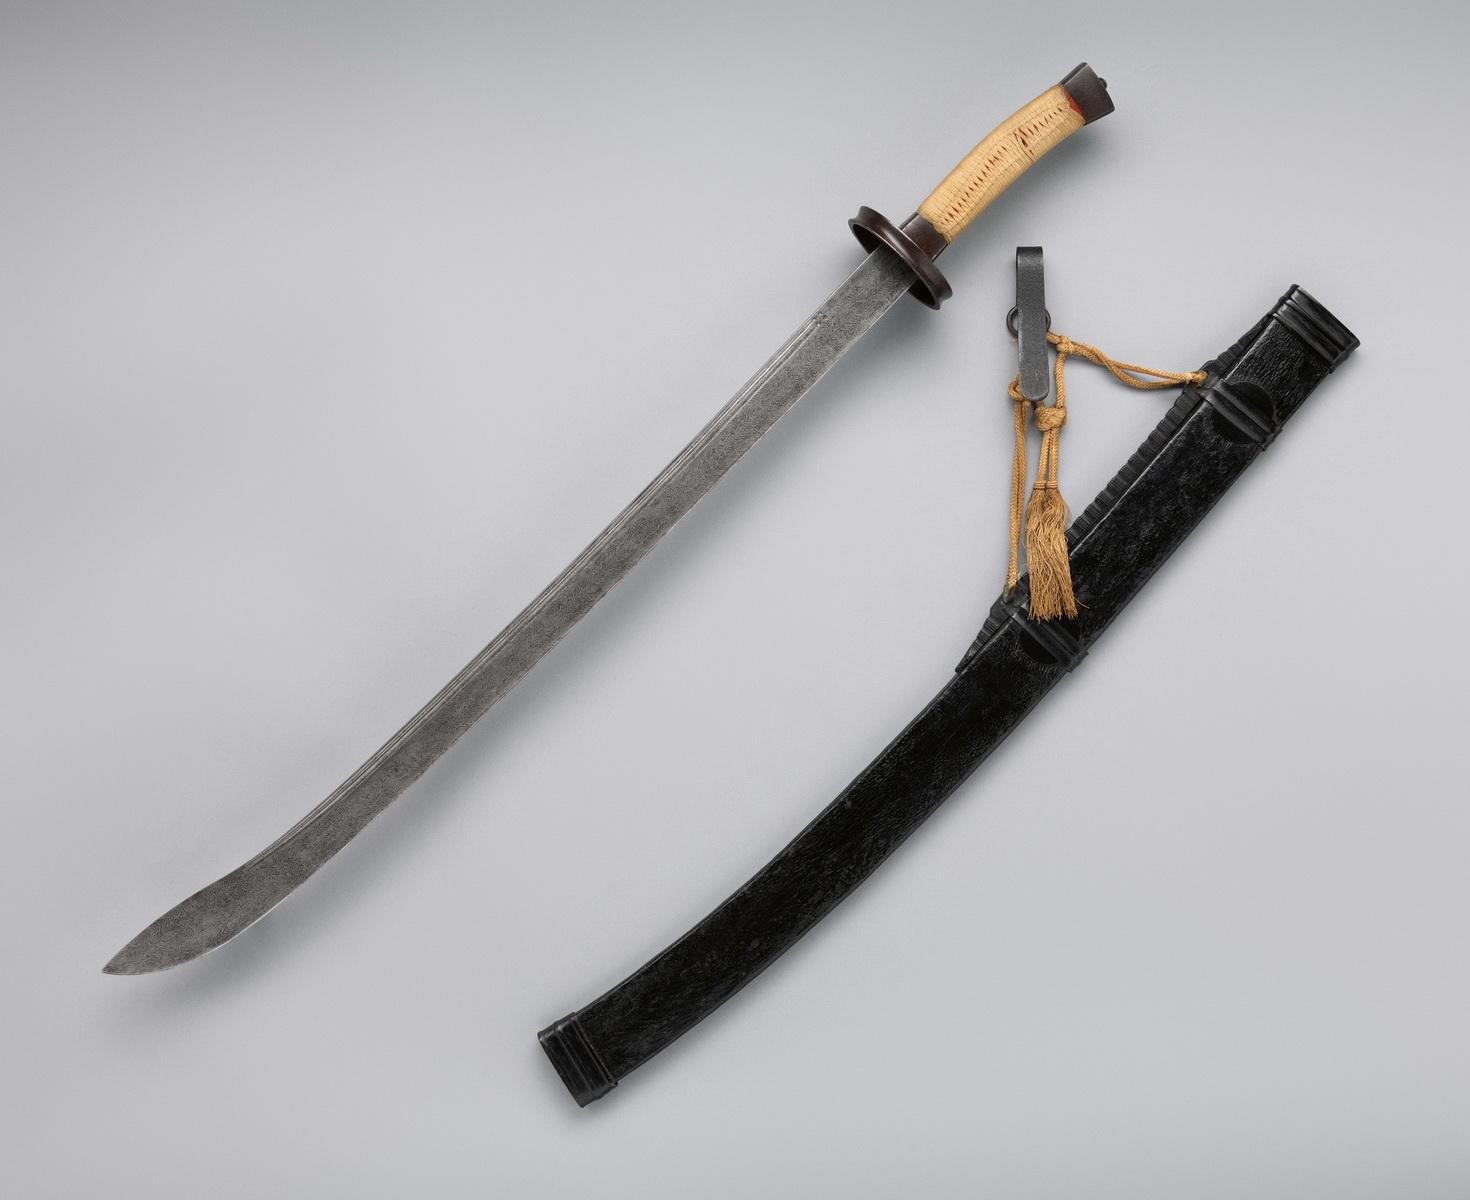 https://bsmith.ru/files/styles/colorbox_full/public/dao_saber_with_scabbard.jpg